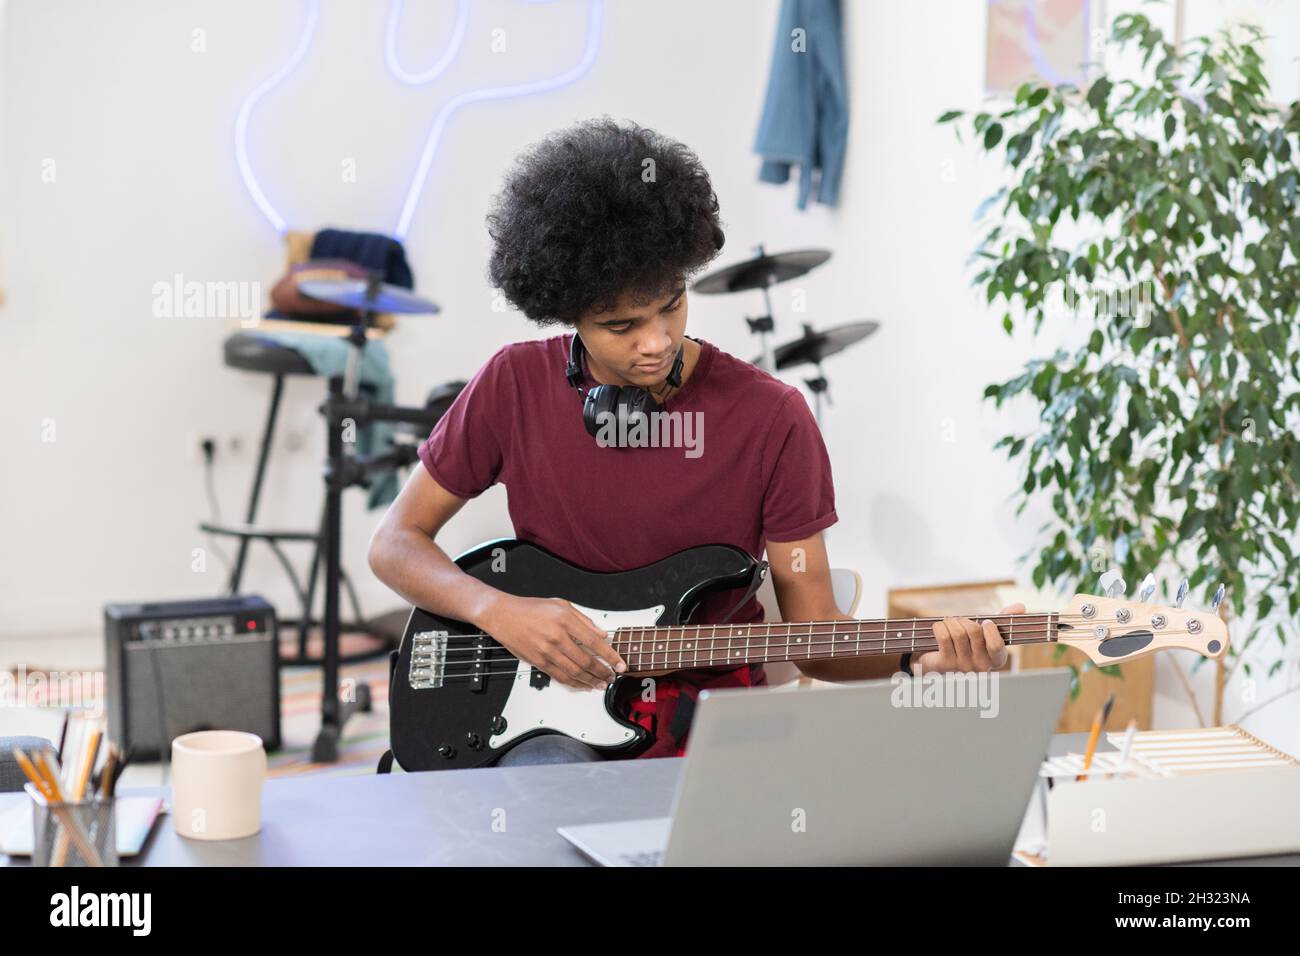 Diligent guy playing electric guitar in front of laptop during online lesson or masterclass in home environment Stock Photo